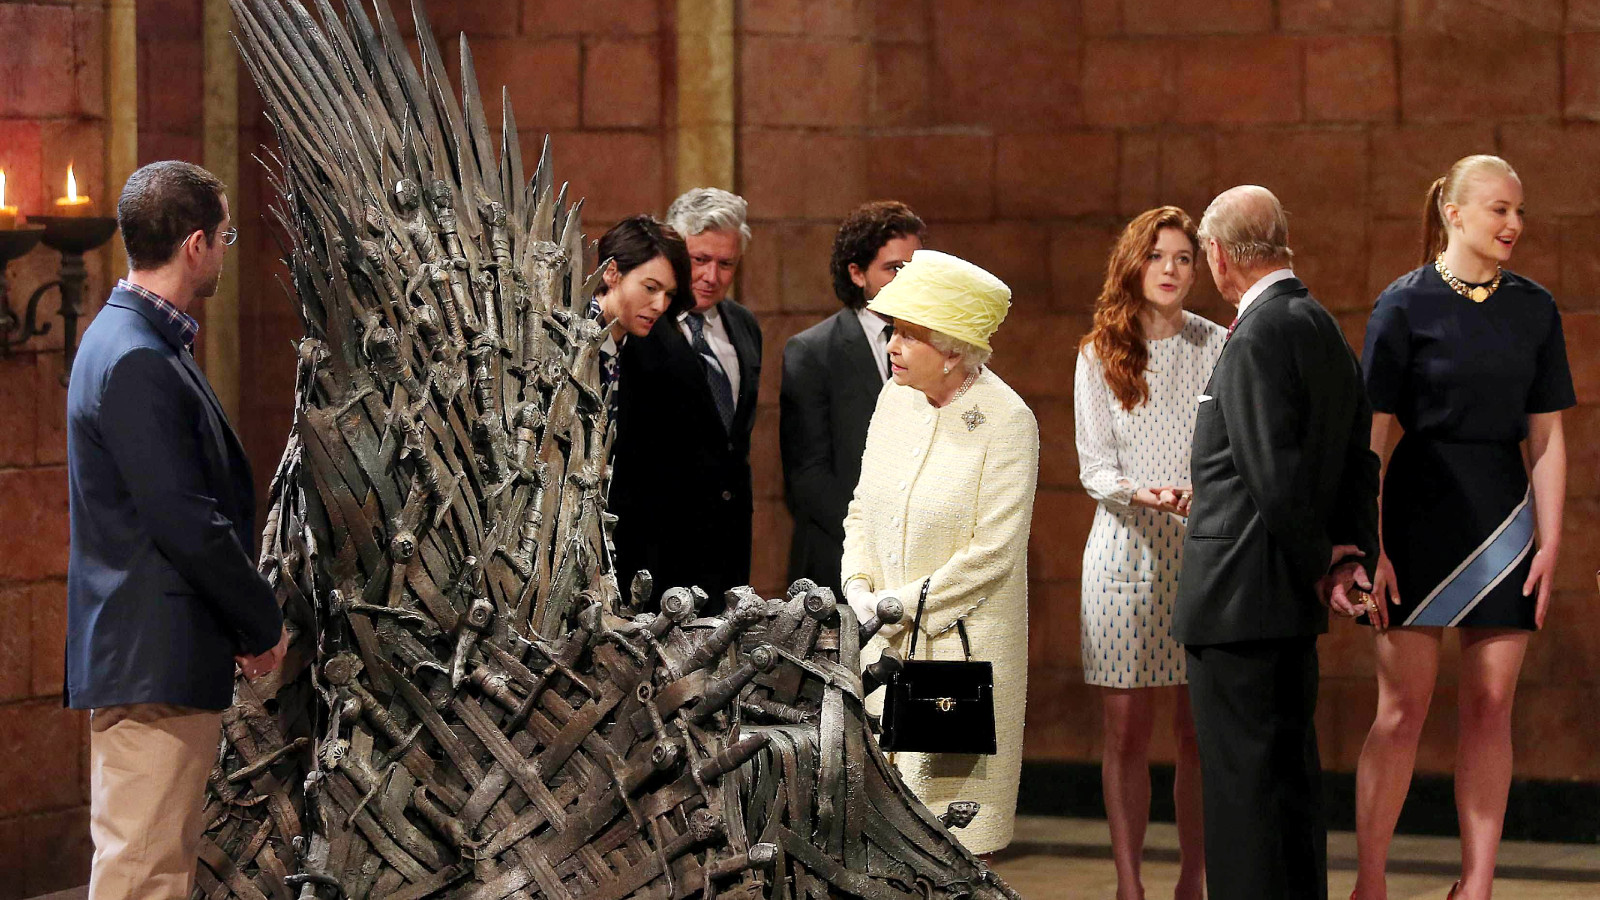  Queen Elizabeth II meets cast members of the HBO TV series 'Game of Thrones' Lena Headey and Conleth Hill while Prince Philip, Duke of Edinburgh shakes hands with Rose Leslie as they views some of the props including the Iron Throne on set in Belfast's Titanic Quarter on June 24, 2014 in Belfast, Northern Ireland.